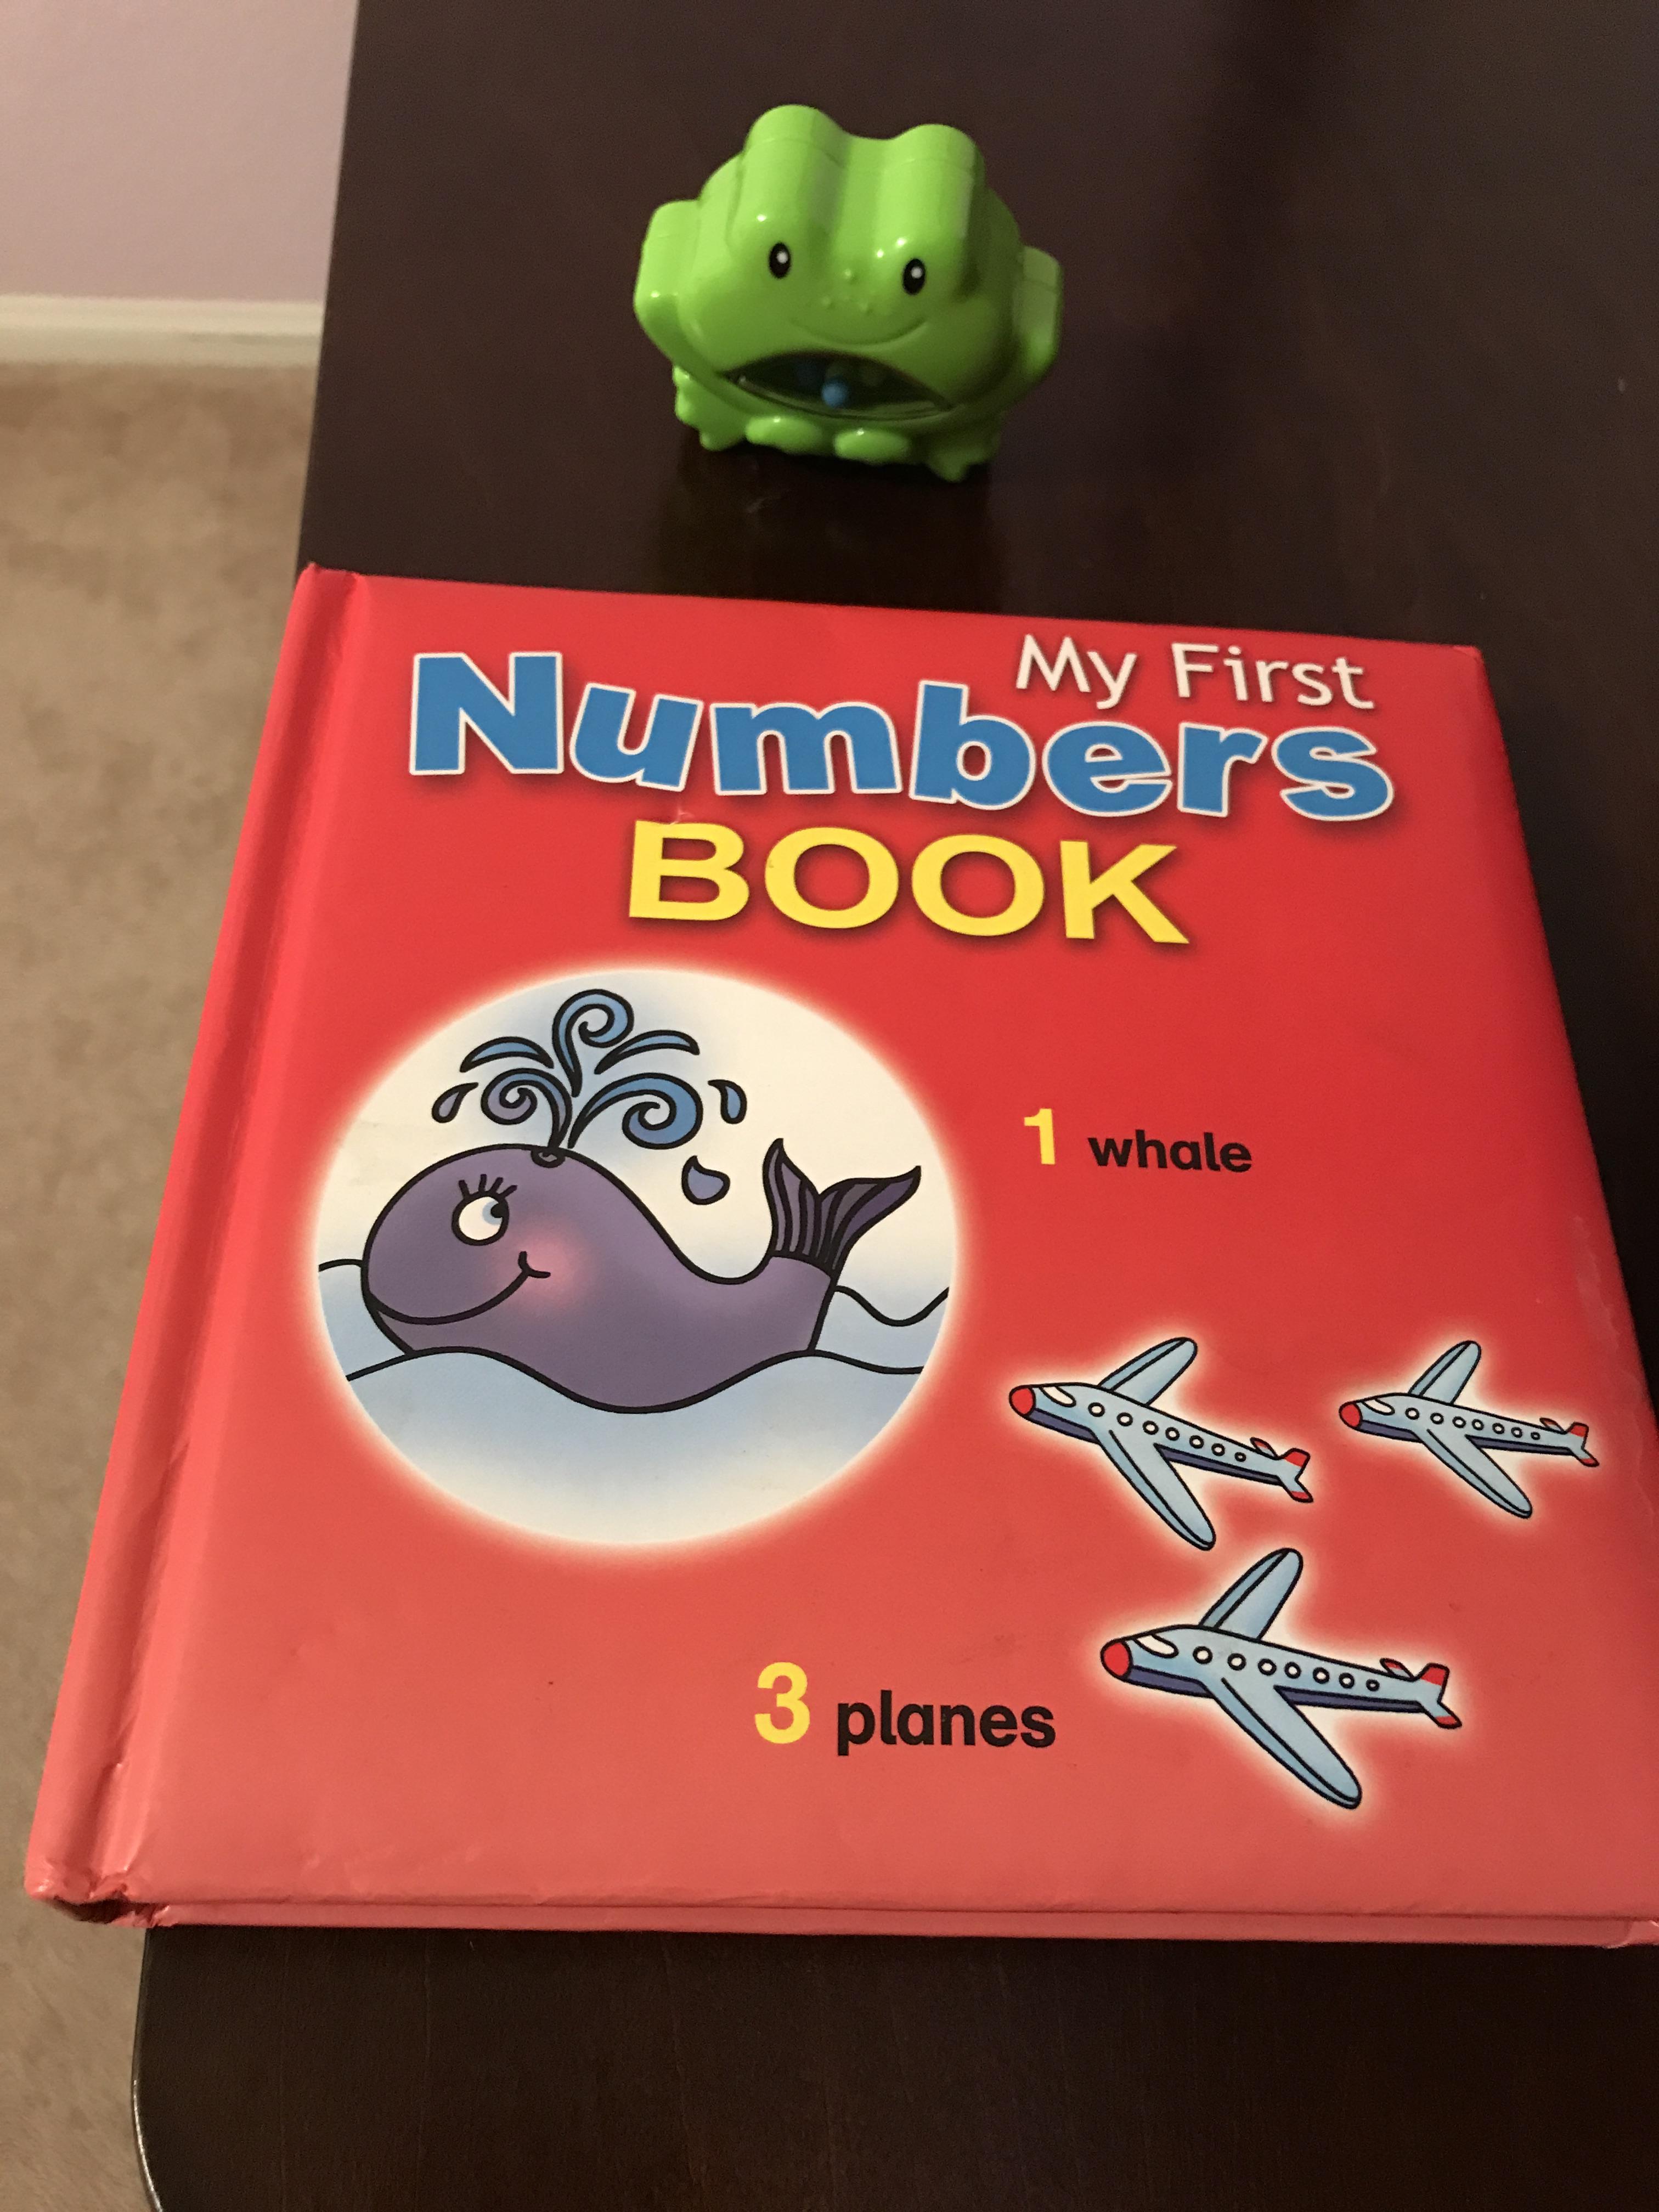 The front of My First Numbers Book (ultraLaser23